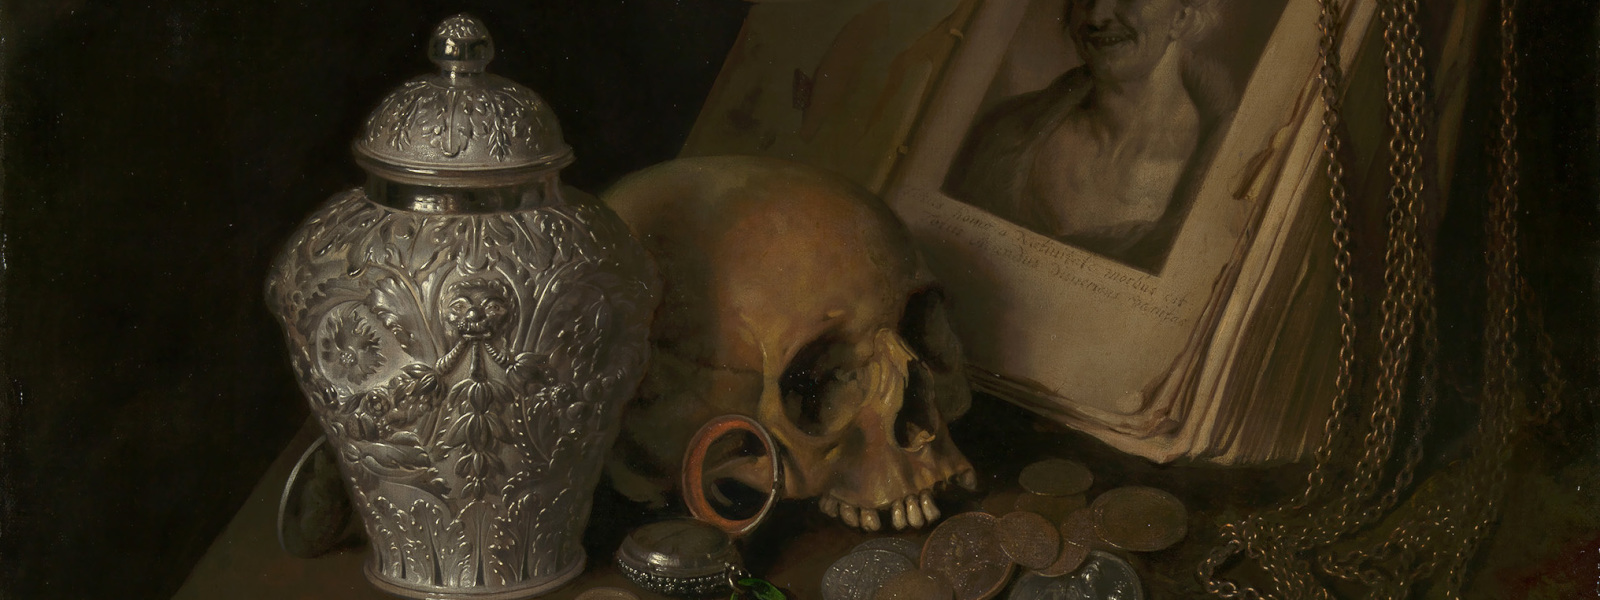 Still life painting showing a skull, urn, coins and book